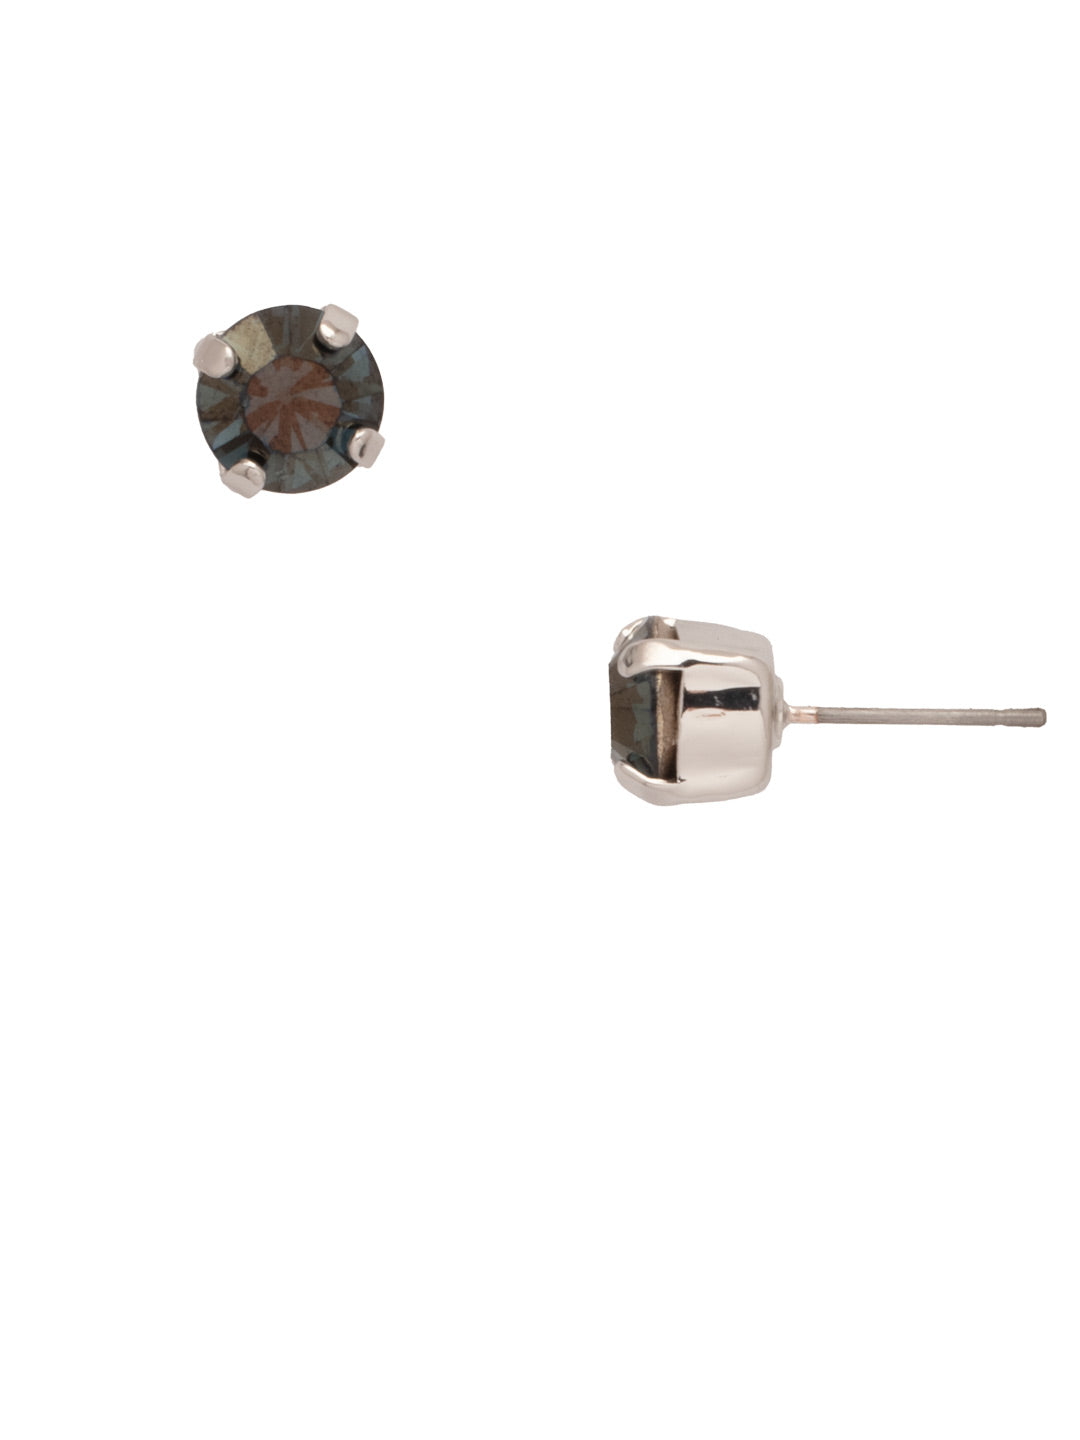 Simple Stud Earrings - EFC99PDMONC - <p>The Simple Stud Earrings feature a single solid crystal on a surgical steel post, creating a small but sparkly everyday staple! Need help picking a stud? <a href="https://www.sorrelli.com/blogs/sisterhood/round-stud-earrings-101-a-rundown-of-sizes-styles-and-sparkle">Check out our size guide!</a> From Sorrelli's Montana Champagne collection in our Palladium finish.</p>